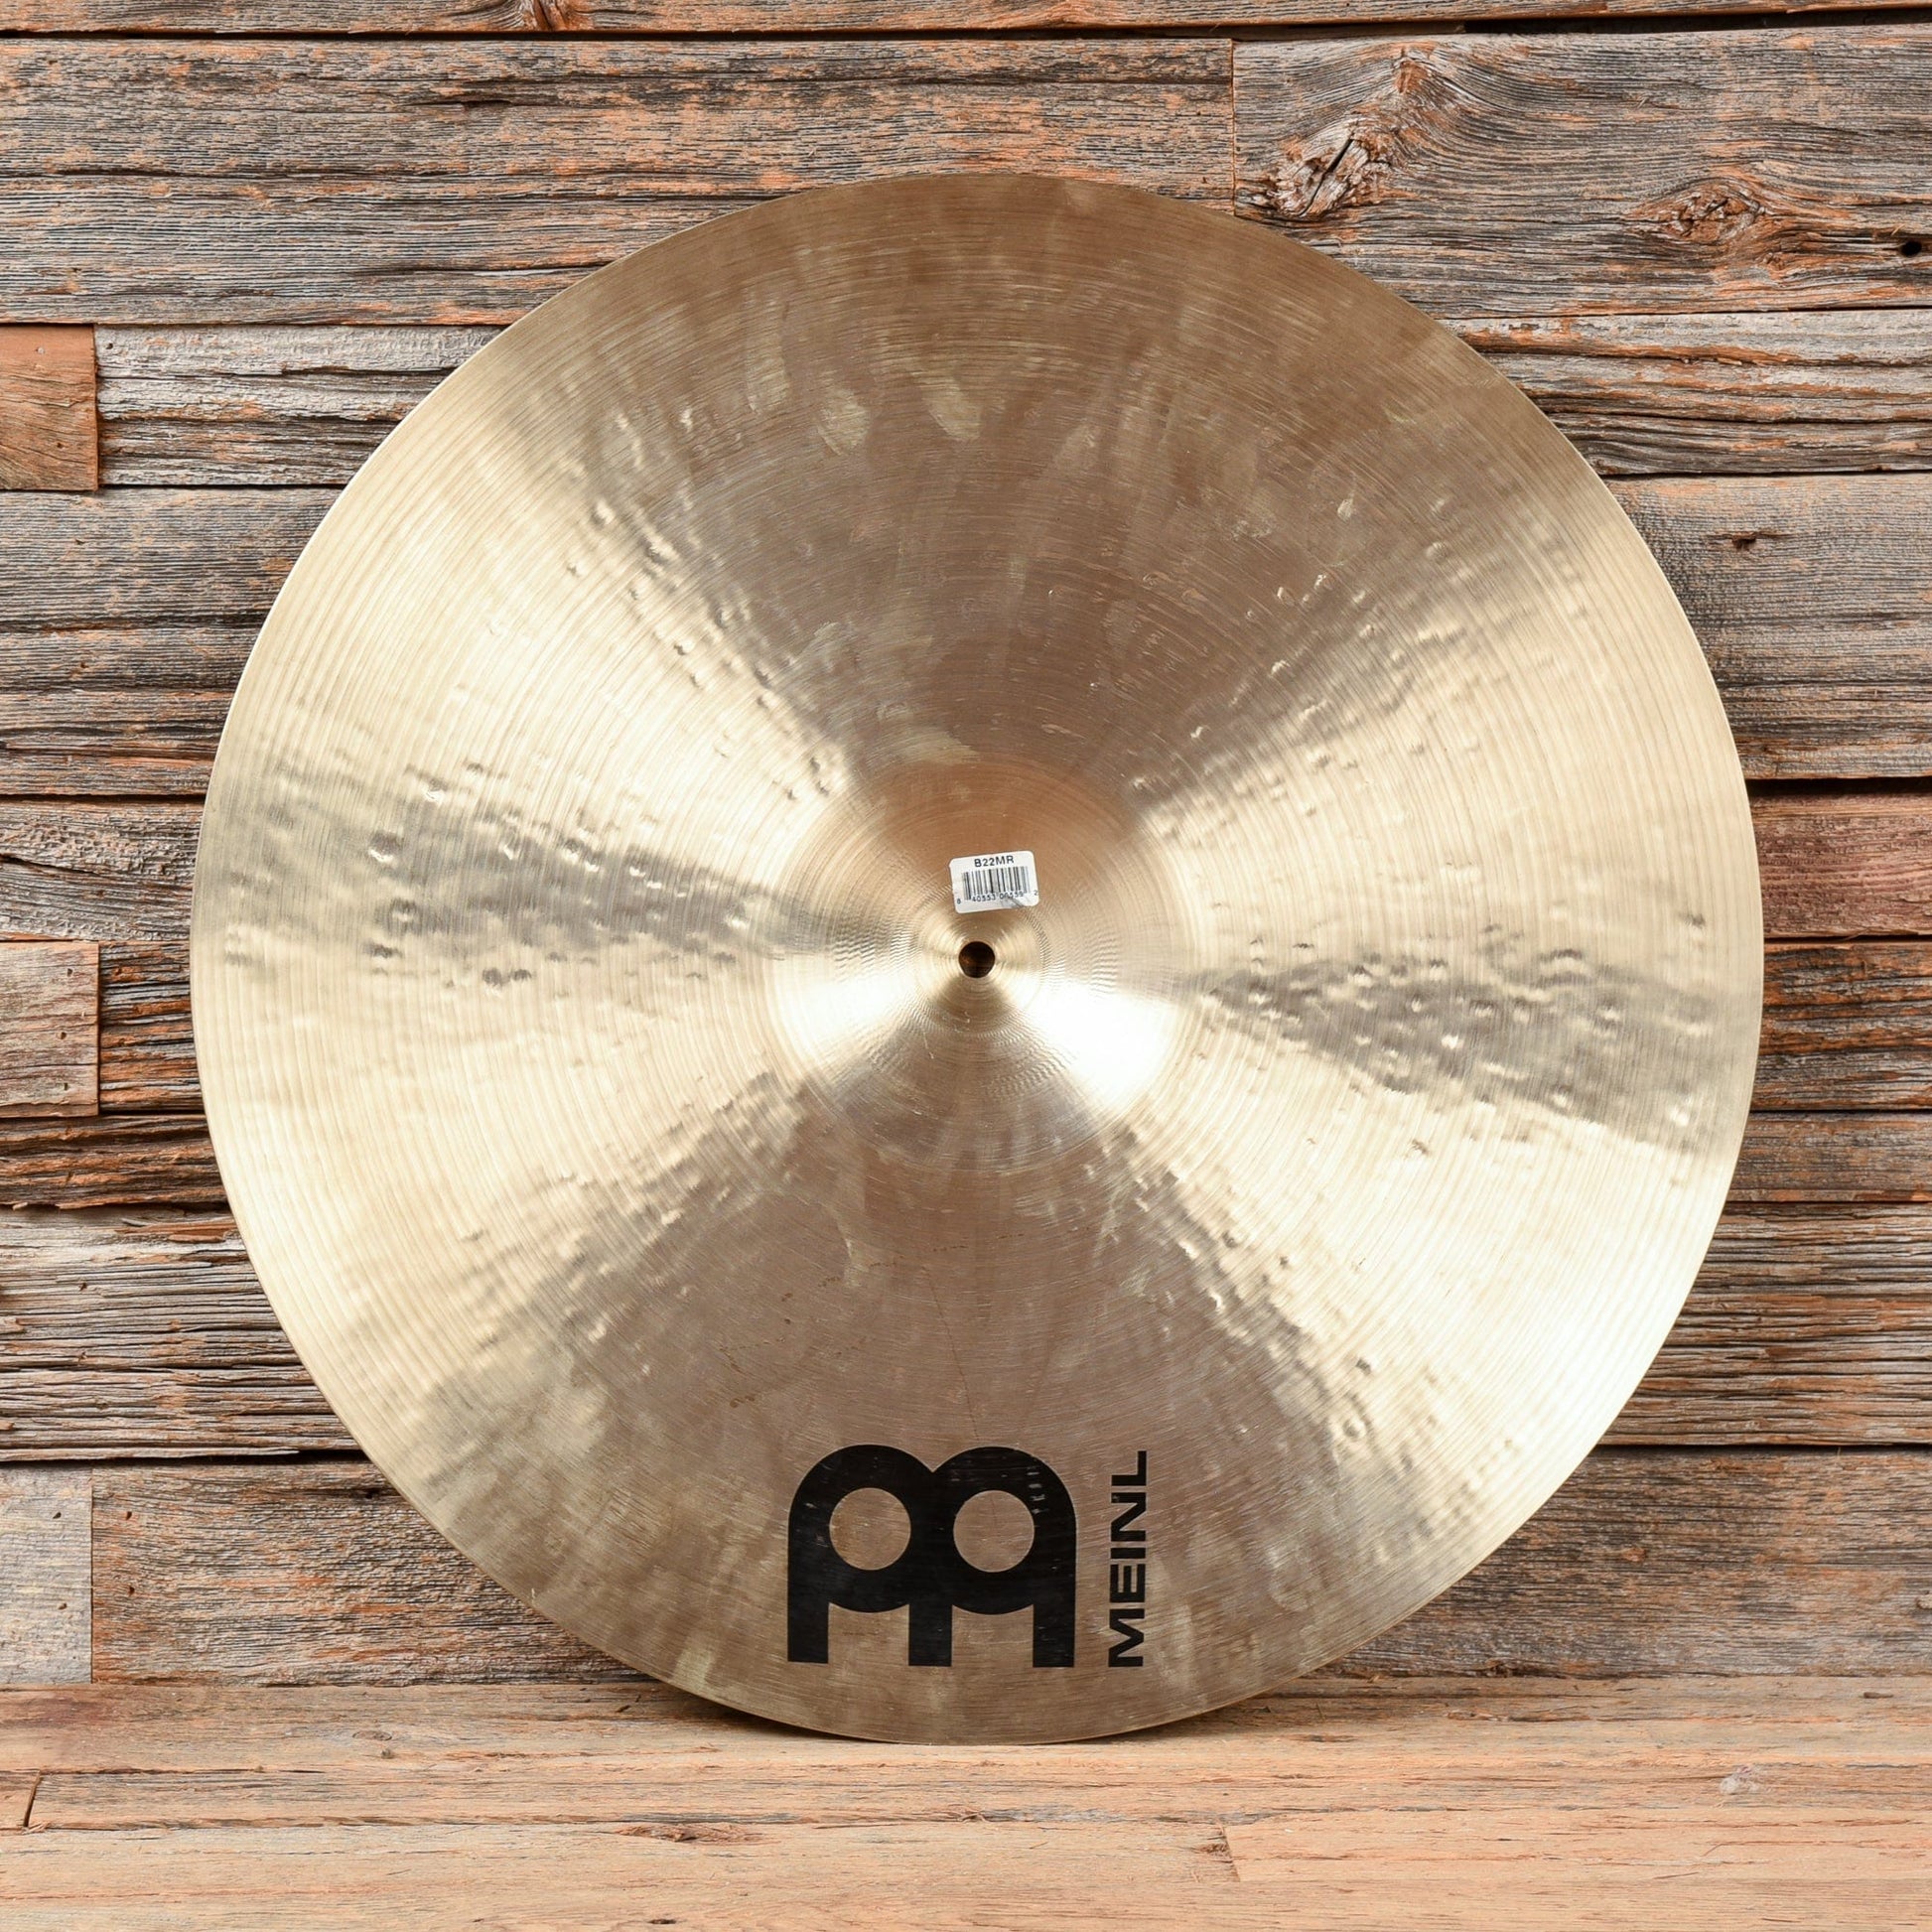 Meinl 22" Byzance Medium Ride Cymbal USED Drums and Percussion